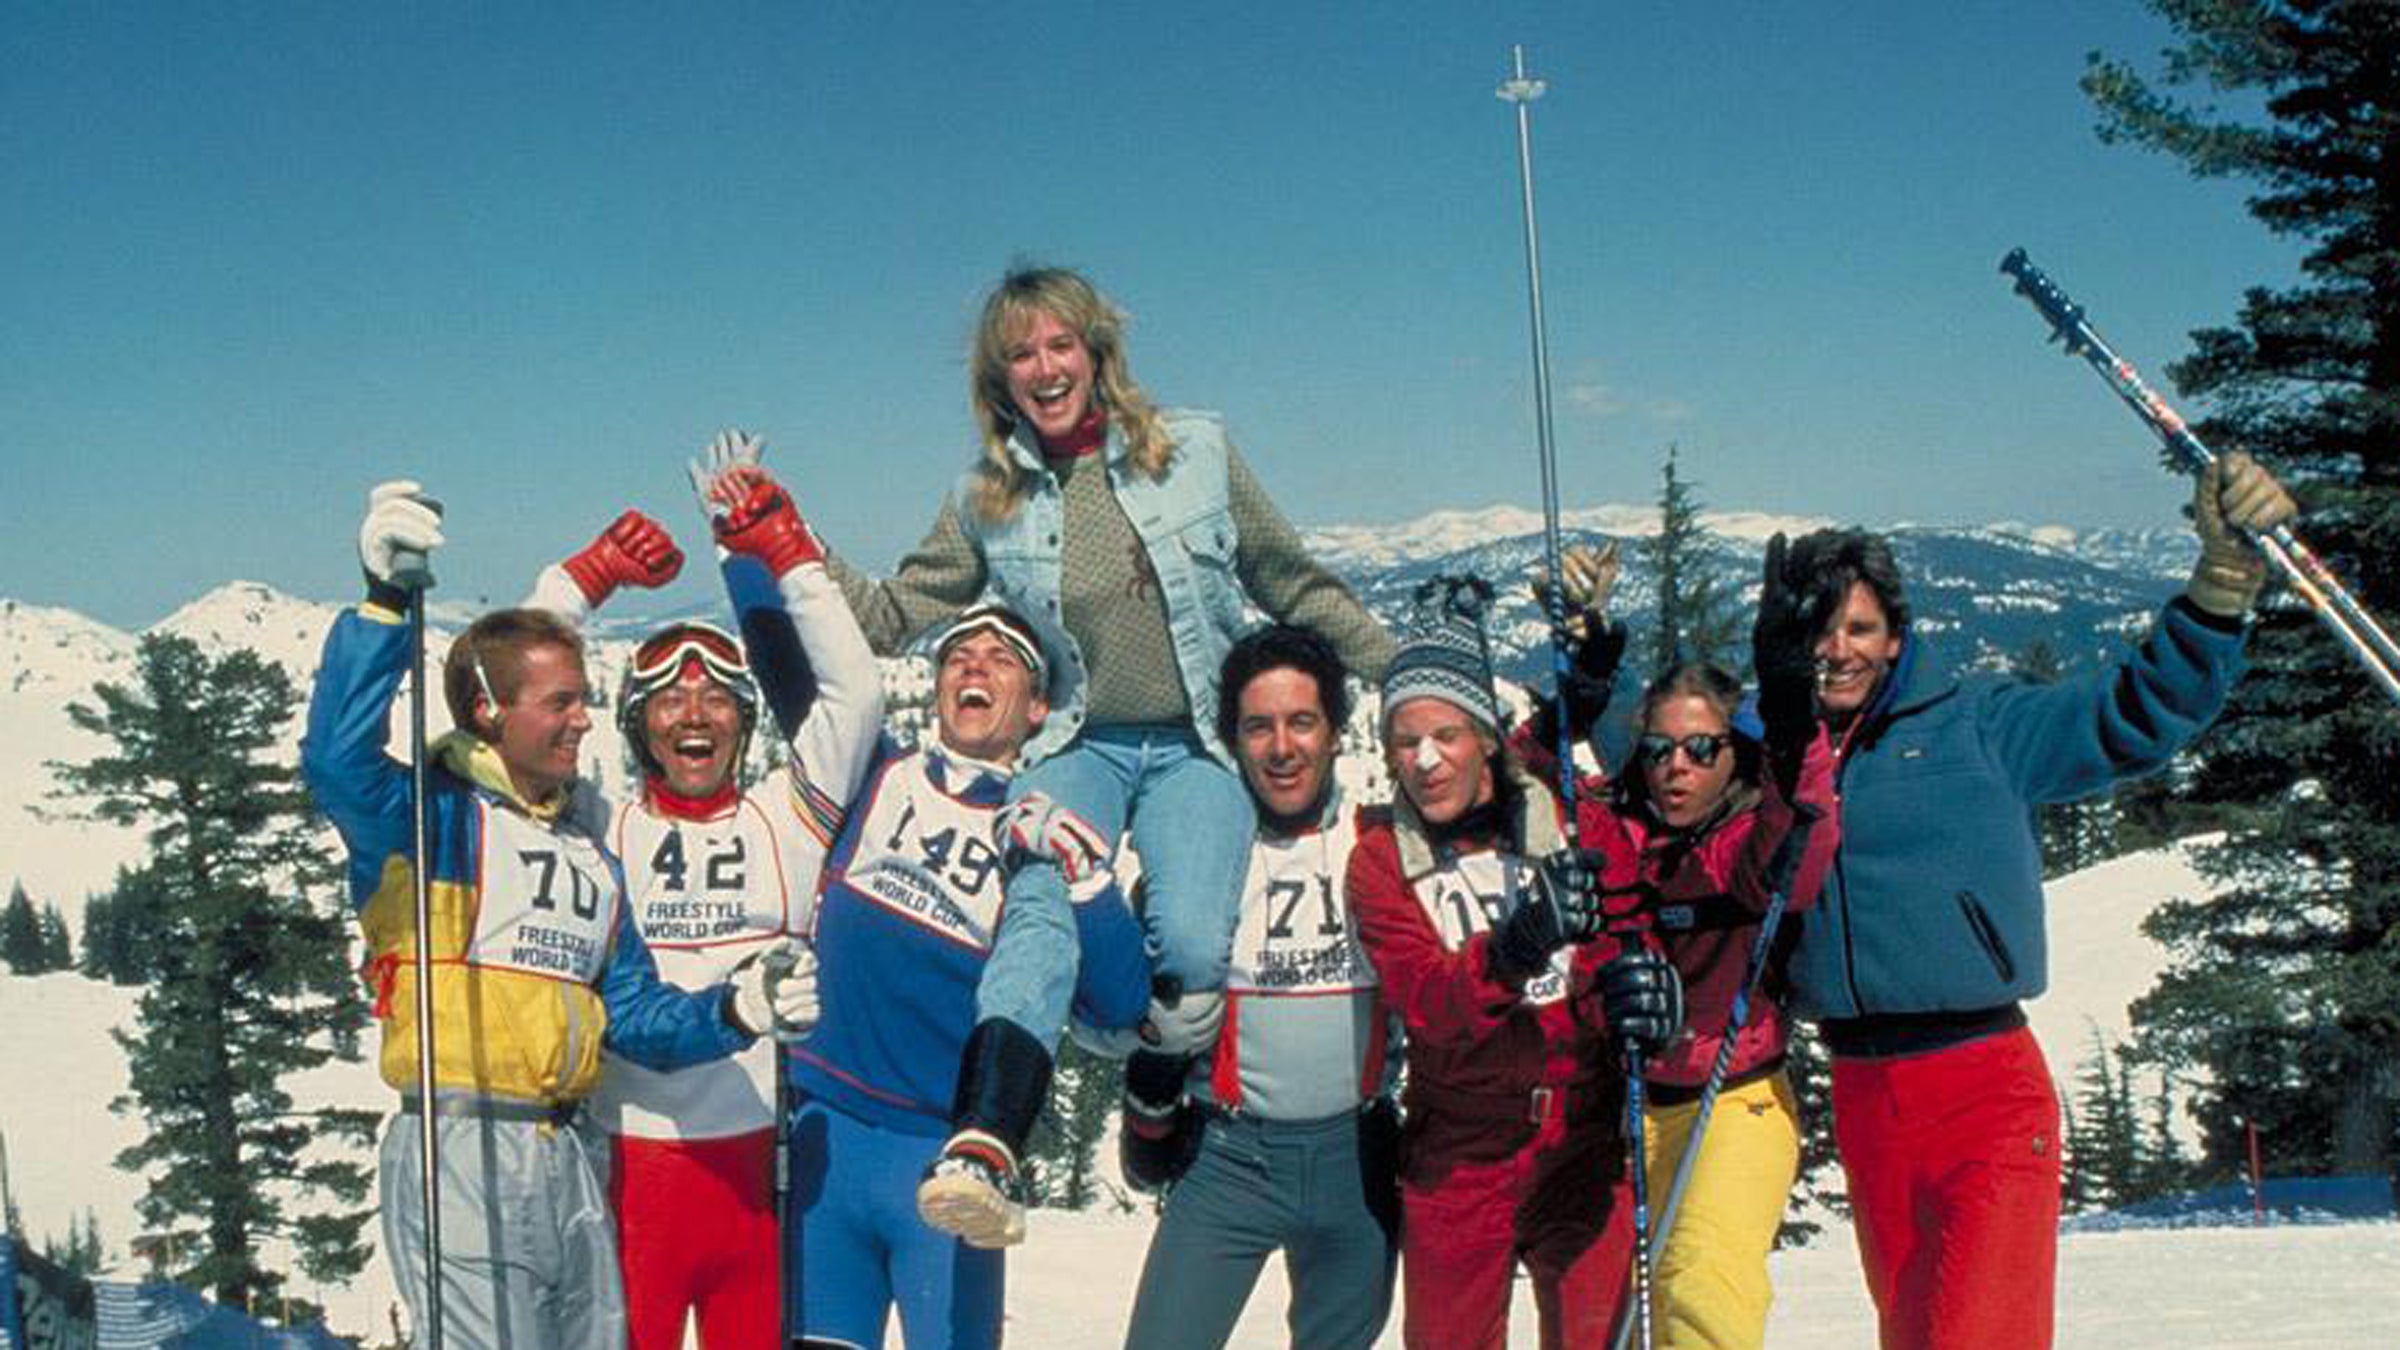 80s Ski Porn Movie Covers - The Unofficial Oral History of 'Hot Dogâ€¦ The Movie'